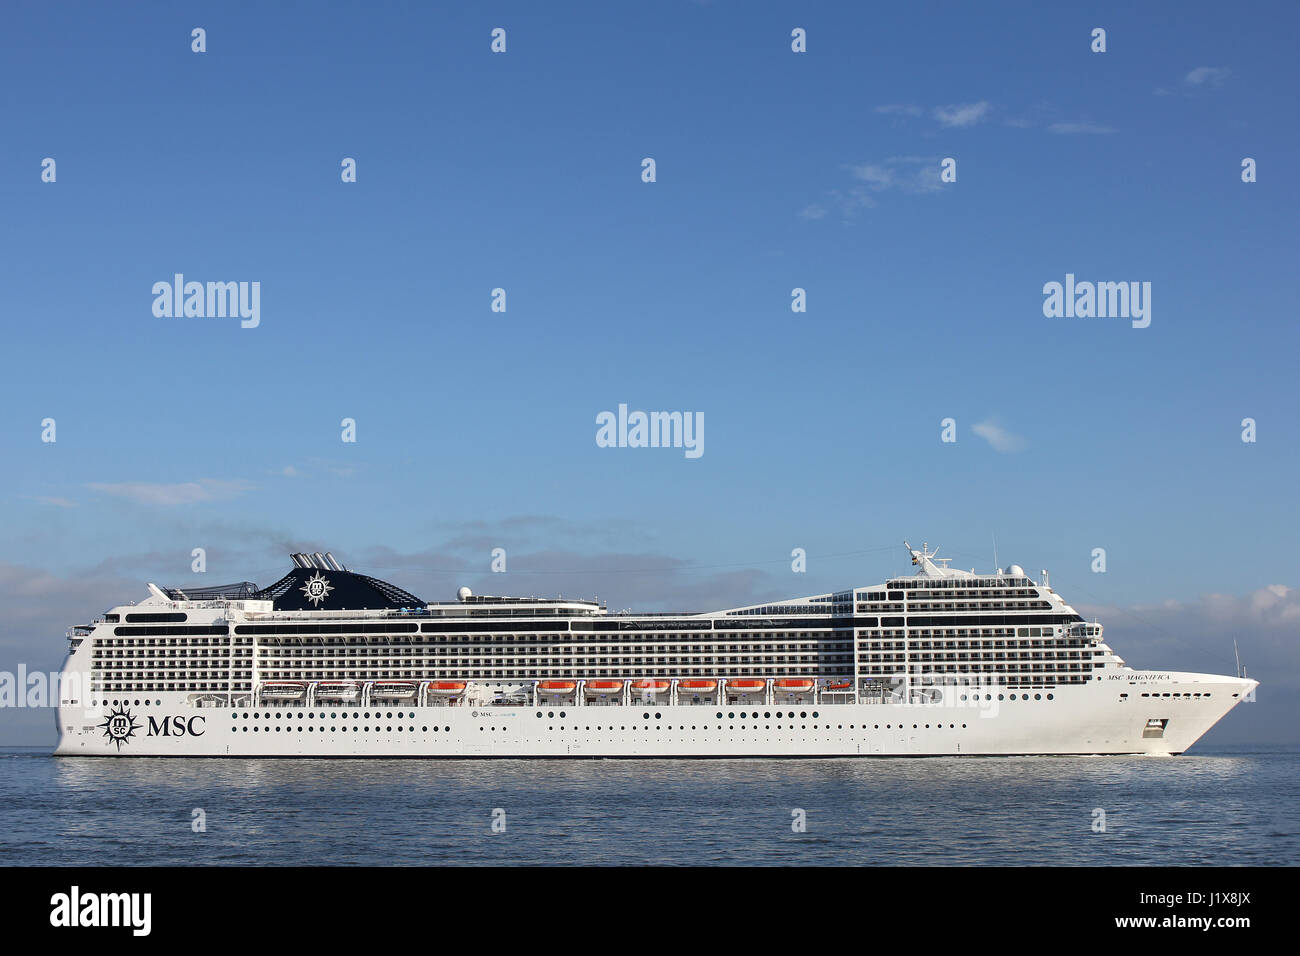 MSC Magnifica on the river Elbe. MSC Magnifica is a Musica class cruise ship operated by MSC Cruises. Stock Photo